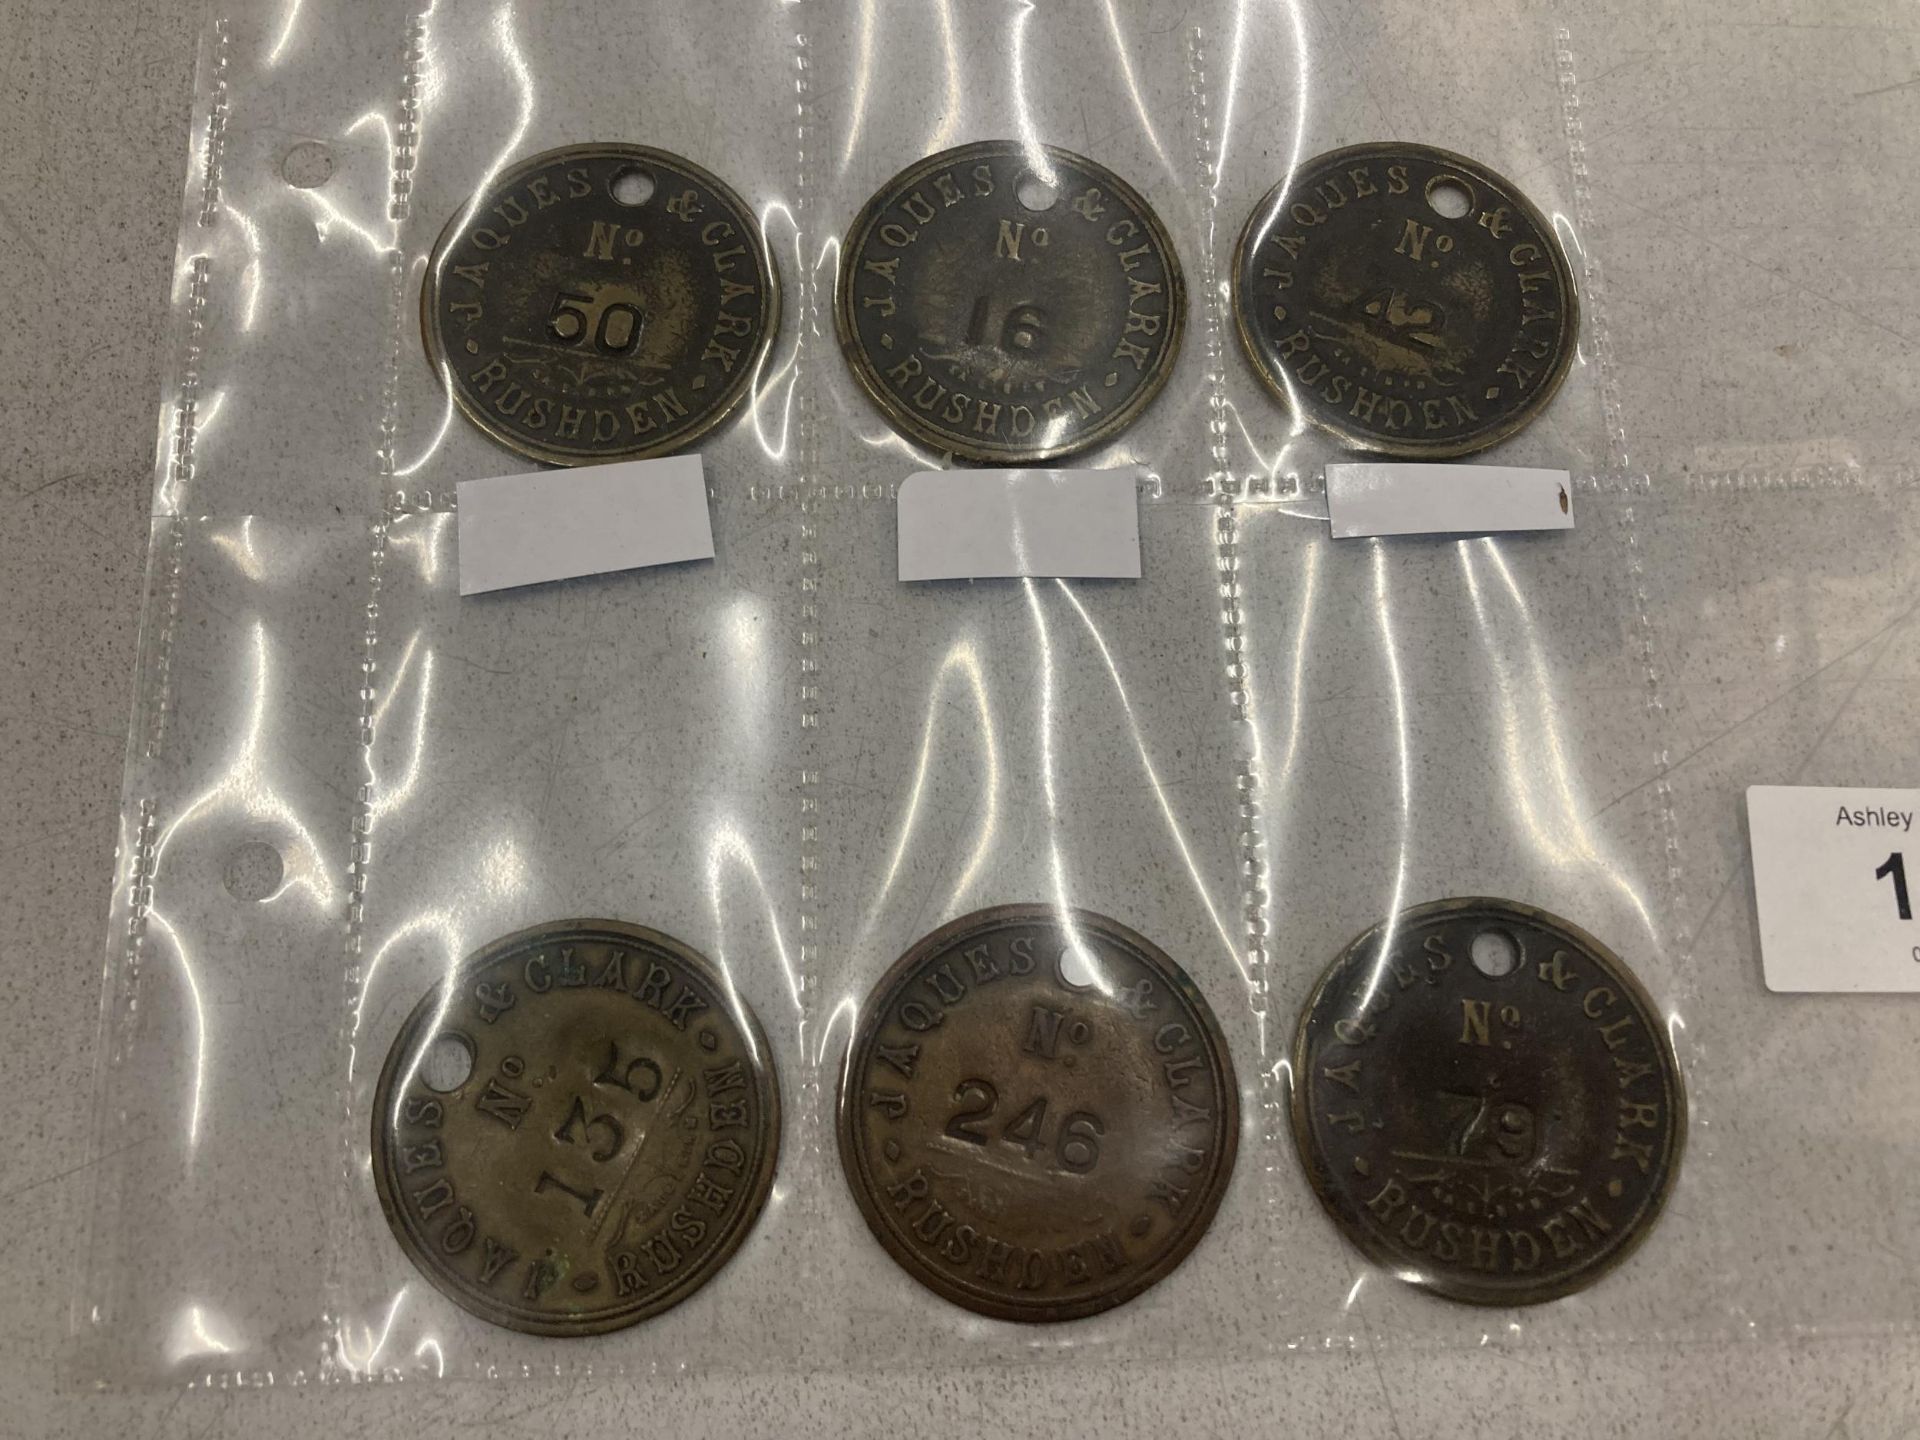 A QUANTITY OF VINTAGE 'JAQUES AND CLARK' CLOCKING IN TOKENS - 6 IN TOTAL